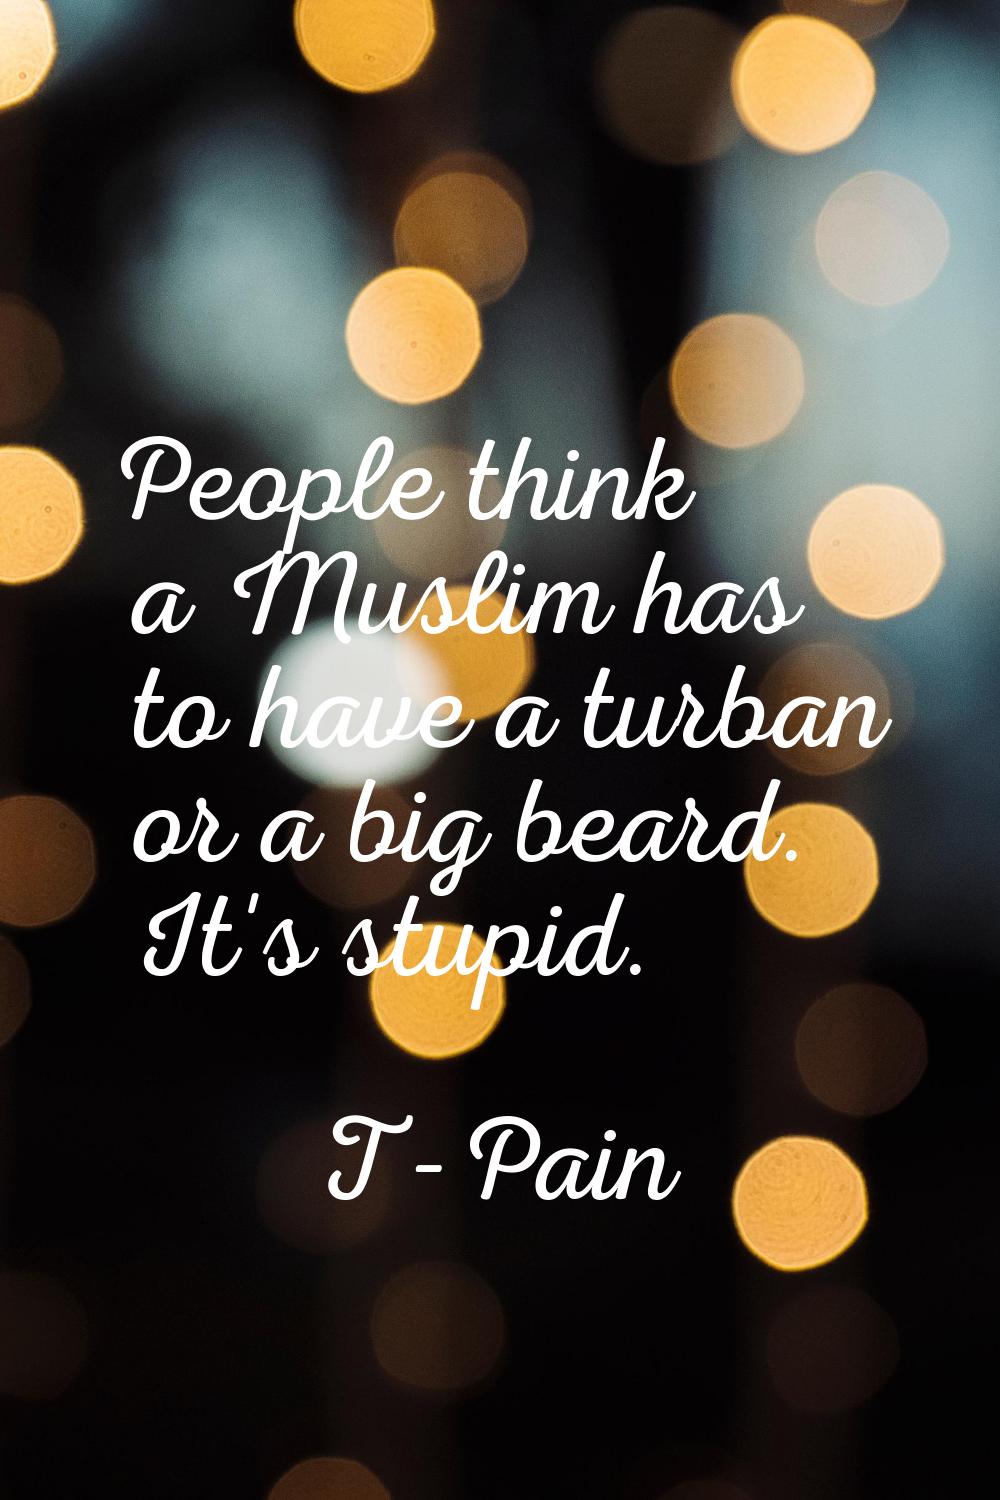 People think a Muslim has to have a turban or a big beard. It's stupid.